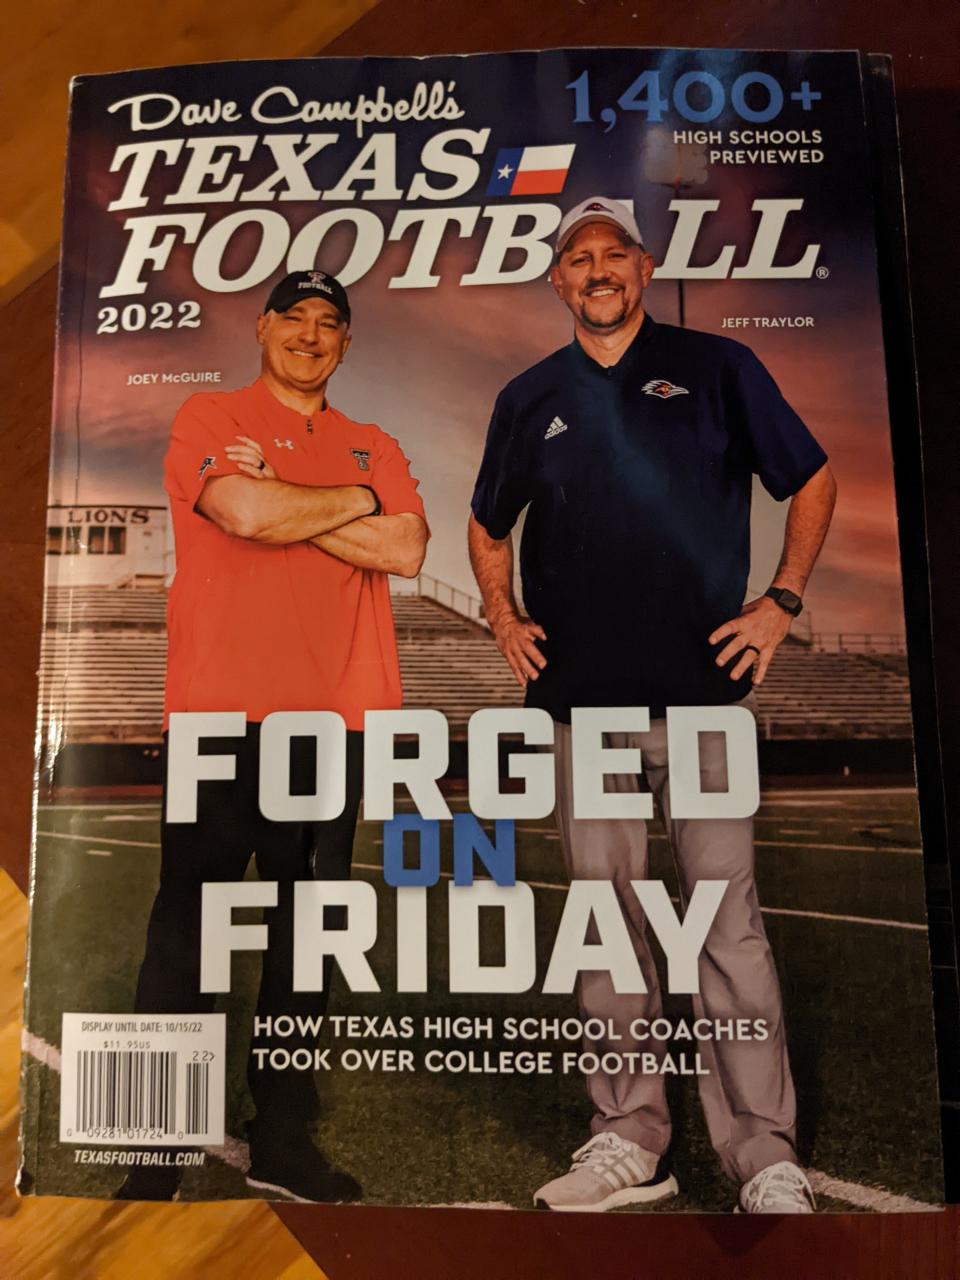 Texas Tech coach Joey McGuire and UTSA coach Jeff Traylor are featured on the 2022 cover of Dave Campbell's Texas Football magazine.